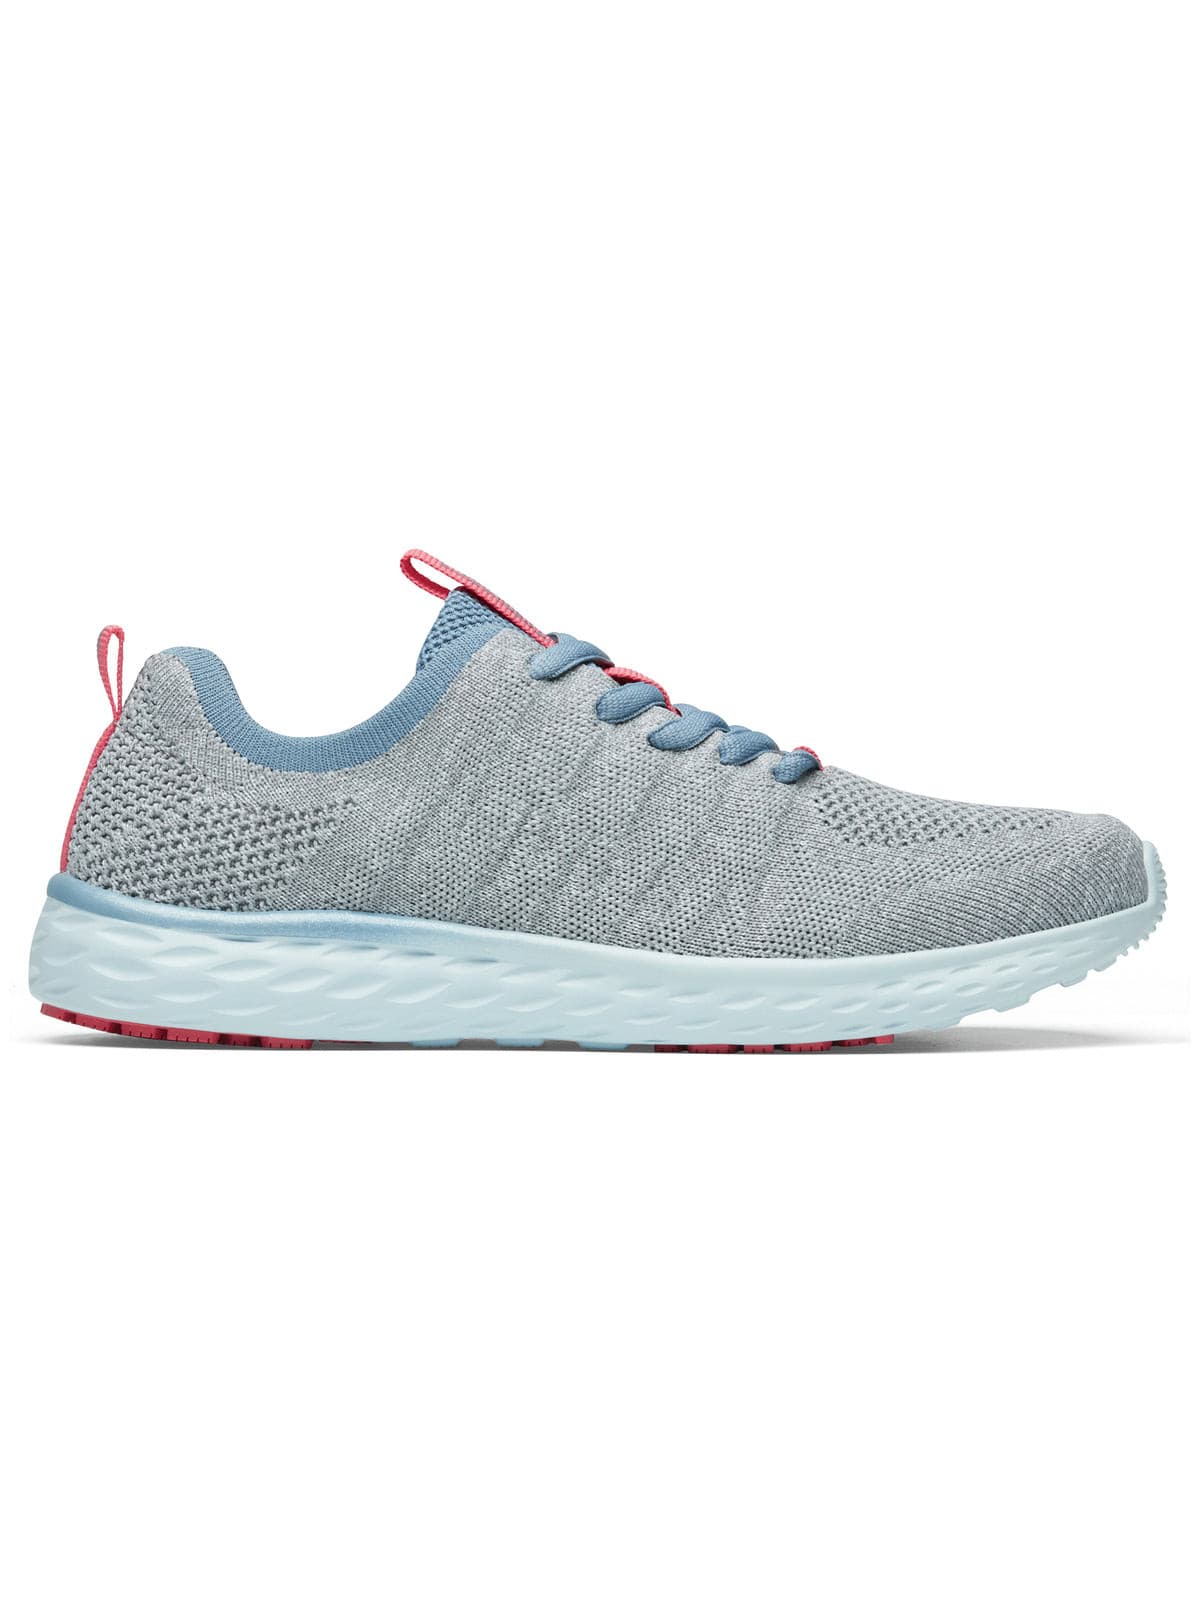 Women's Work Shoe Everlight Gray Blue Coral by  Shoes For Crews.